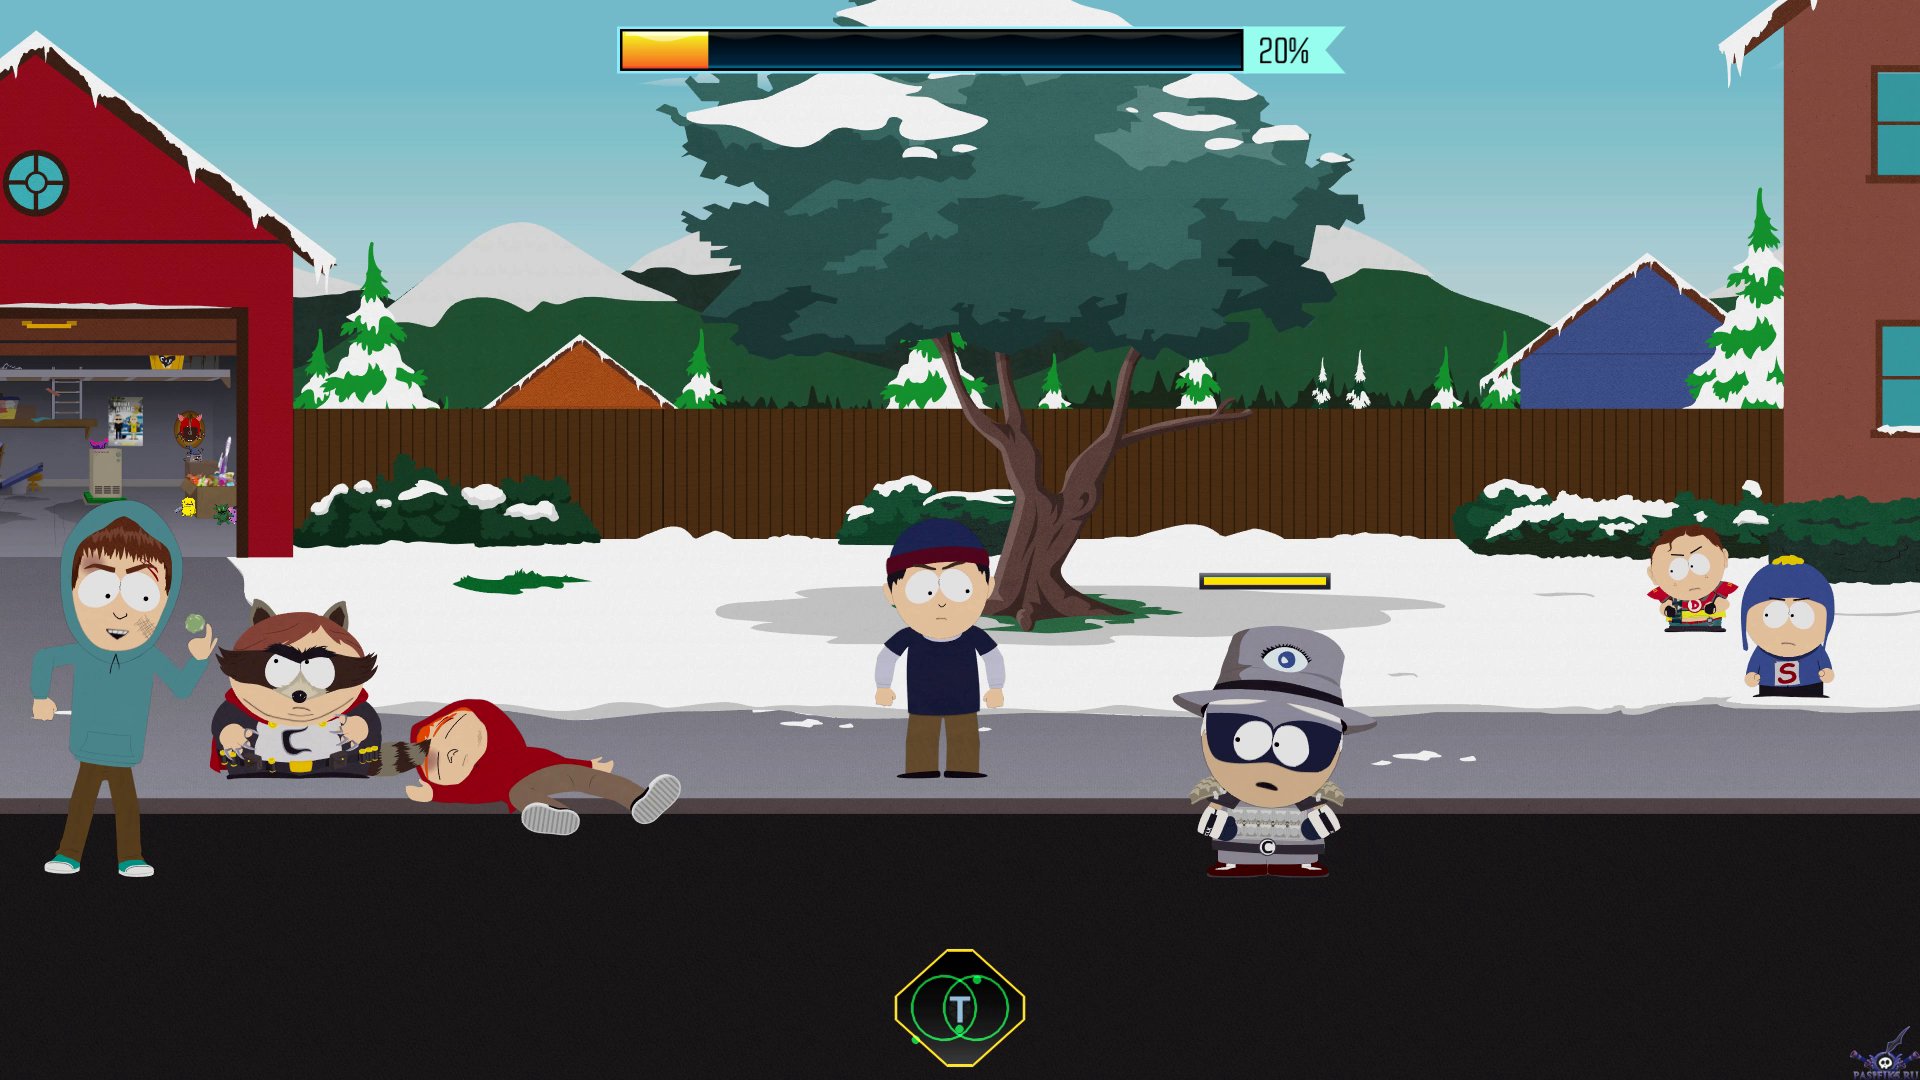 South park the fractured but whole купить ключ steam фото 114